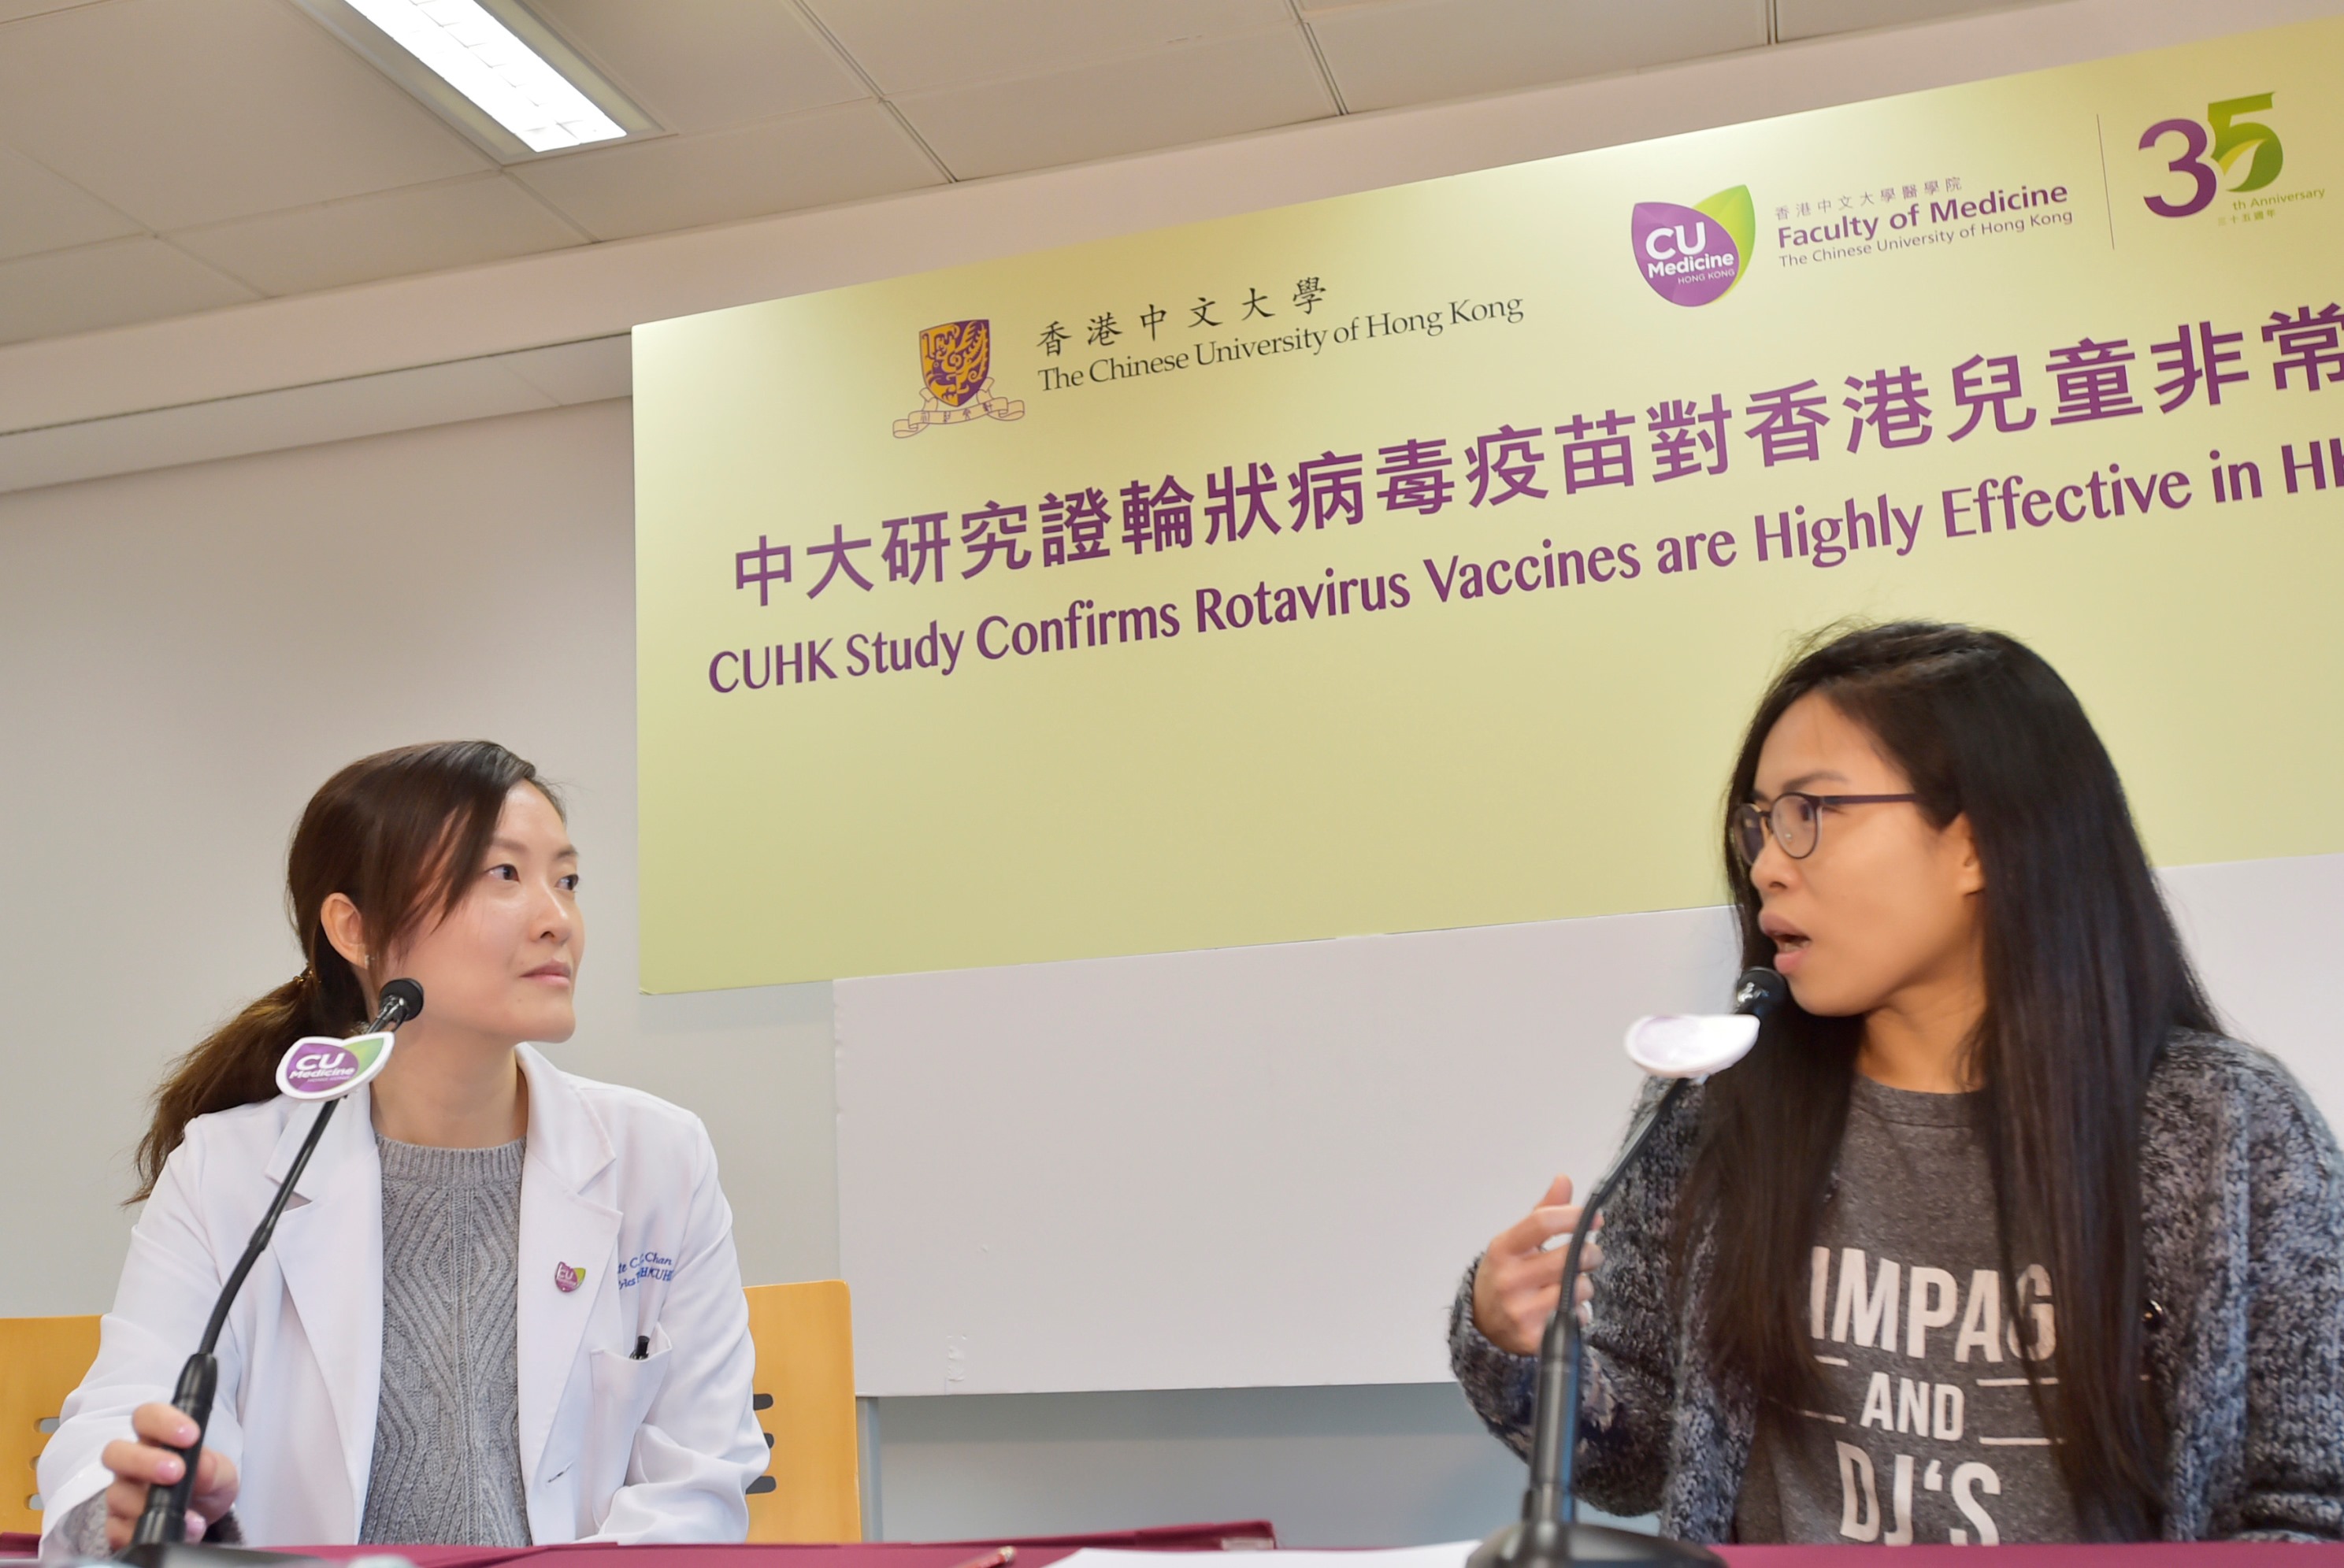 Mrs Ho (right) says her daughter was admitted to hospital for four days because of rotavirus when she was 2.5 years old. She was not aware that vaccination is available in Hong Kong for prevention.